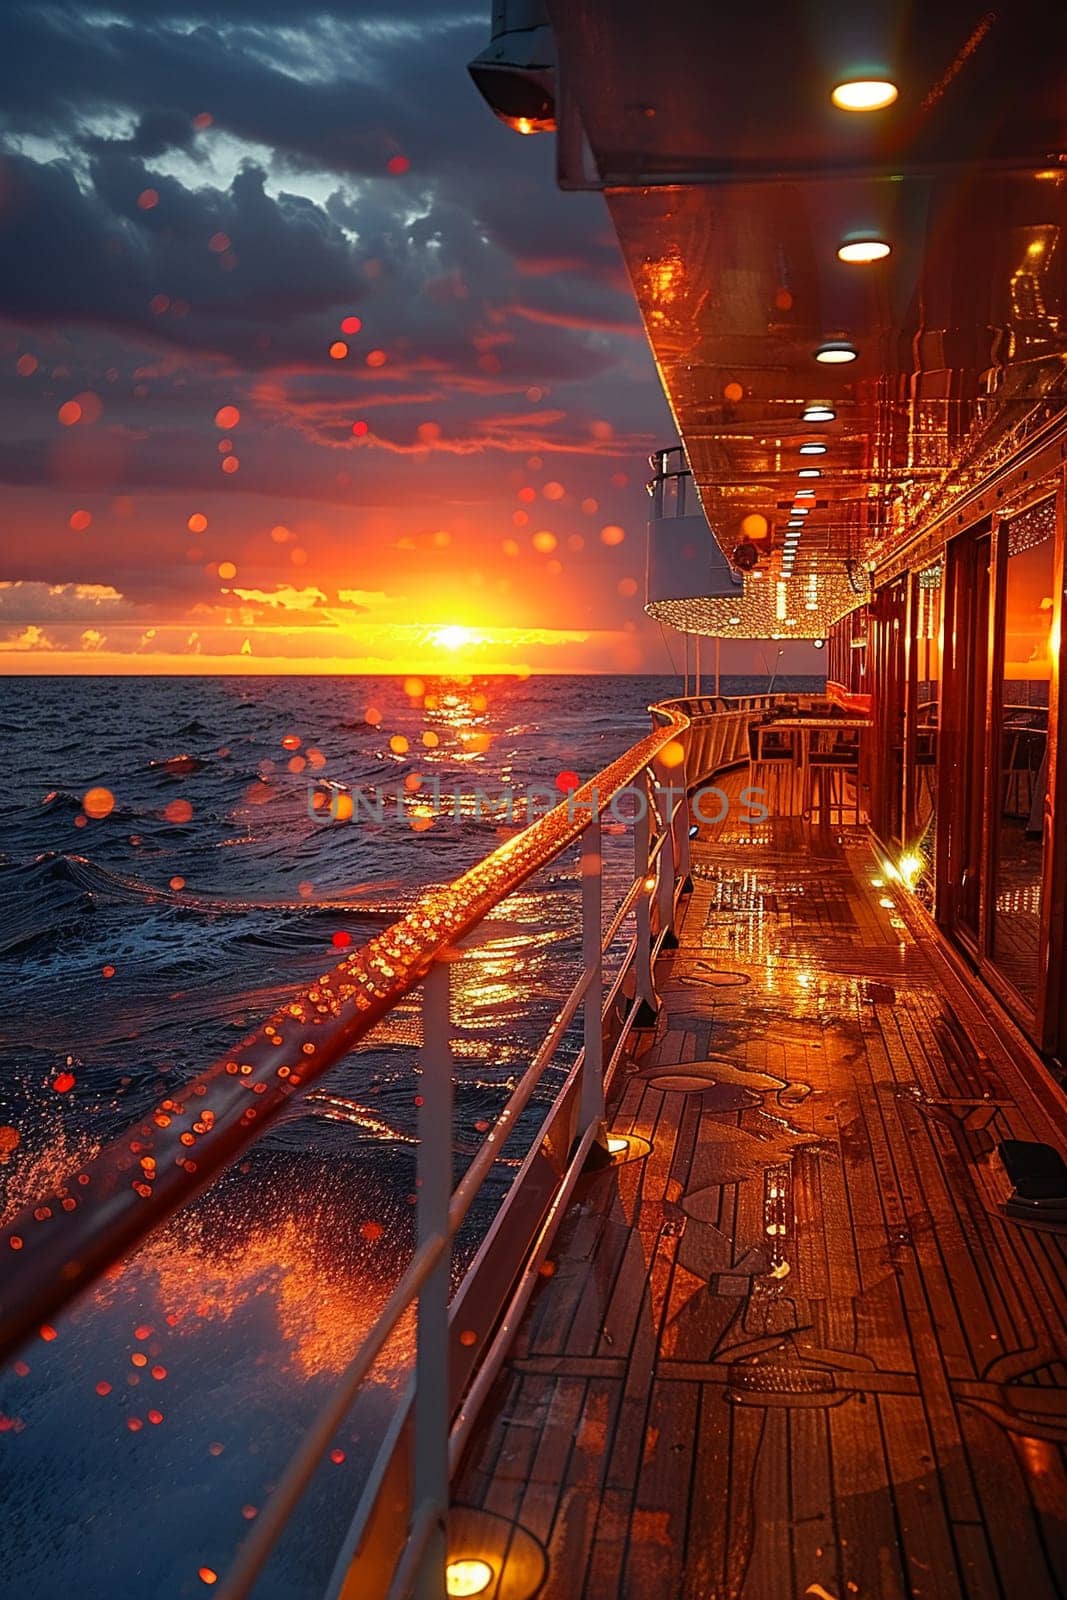 Sunset Cruise Ship Deck Hosting Corporate Celebrations, The golden blur of a sunset on the deck sets the scene for exclusive business festivities.